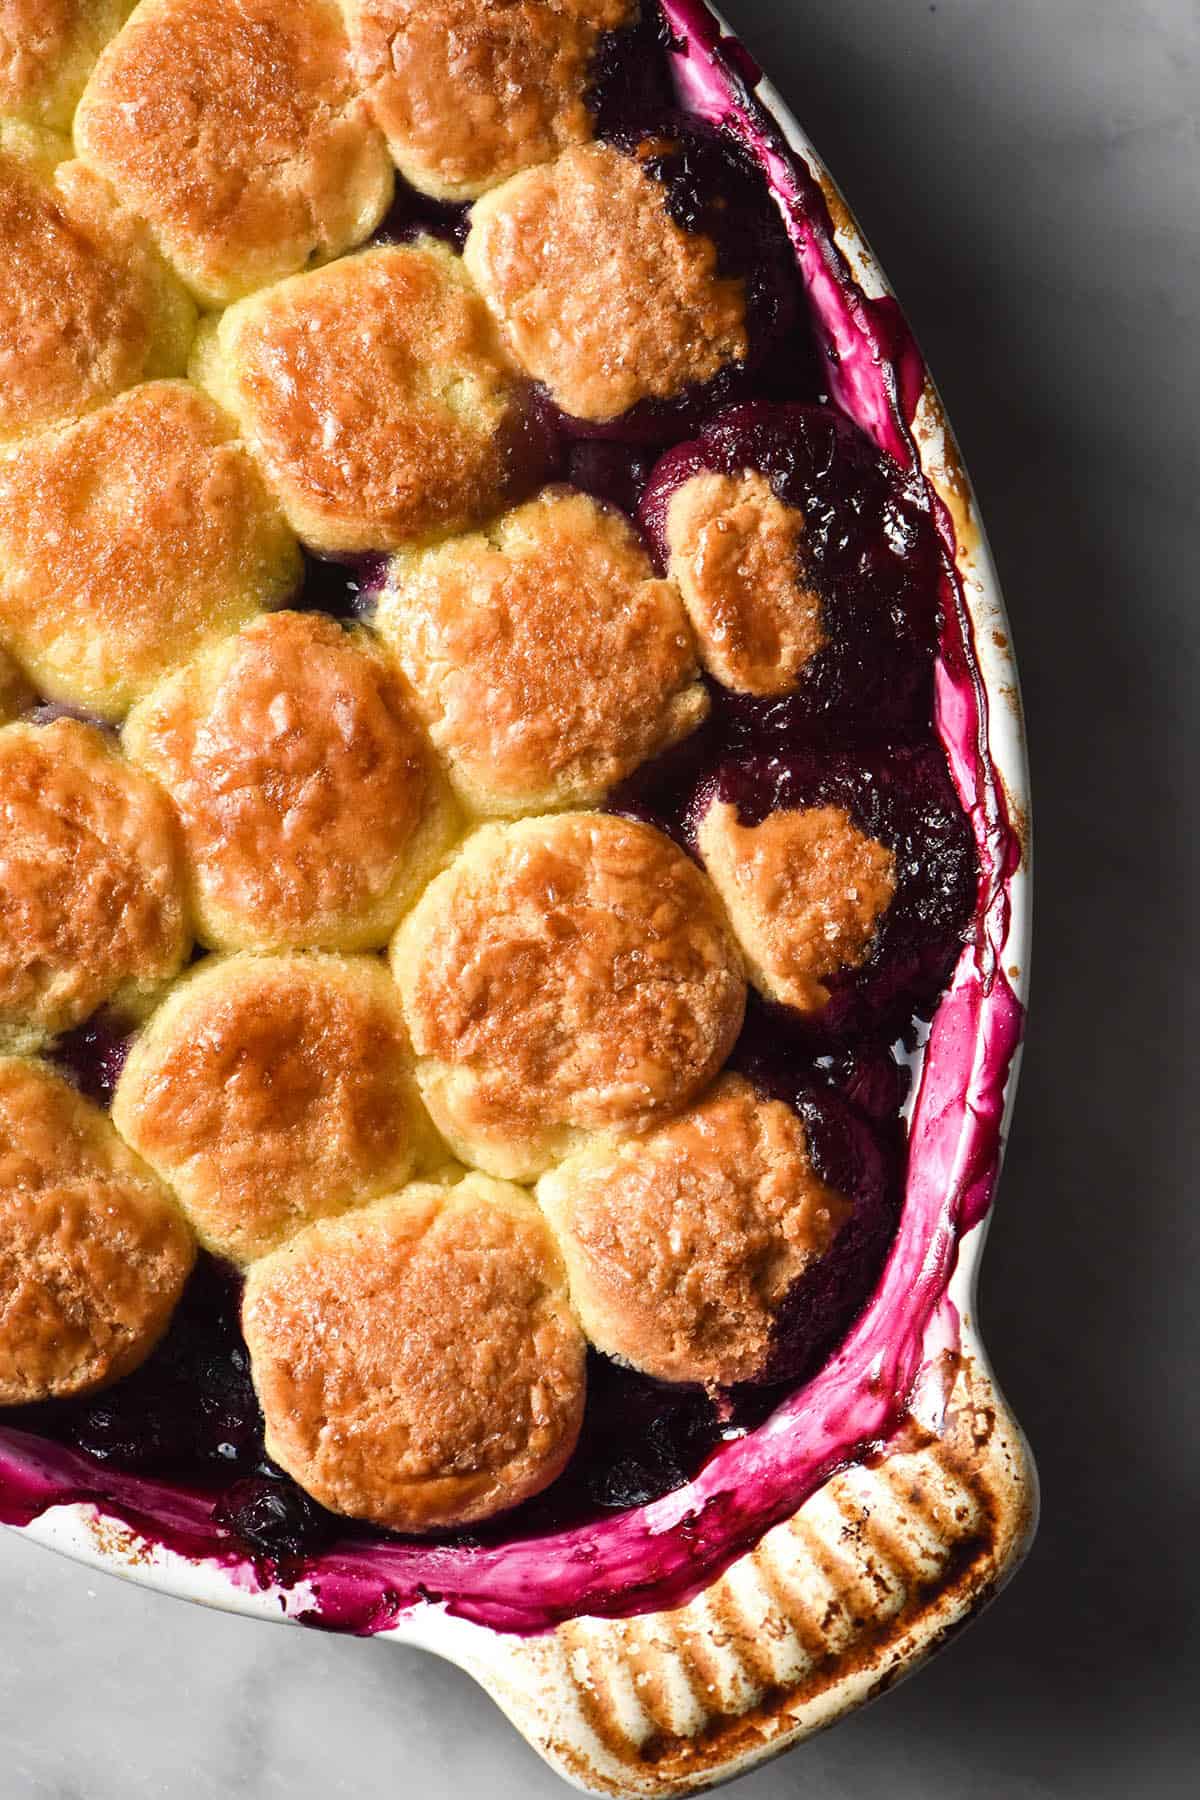 A close up aerial image of a gluten free blueberry cobbler in a white ceramic baking dish atop a white marble table. The cobbler topping is golden brown and the deep purple blueberry juices have create a bright purple pattern on the edges of the baking dish